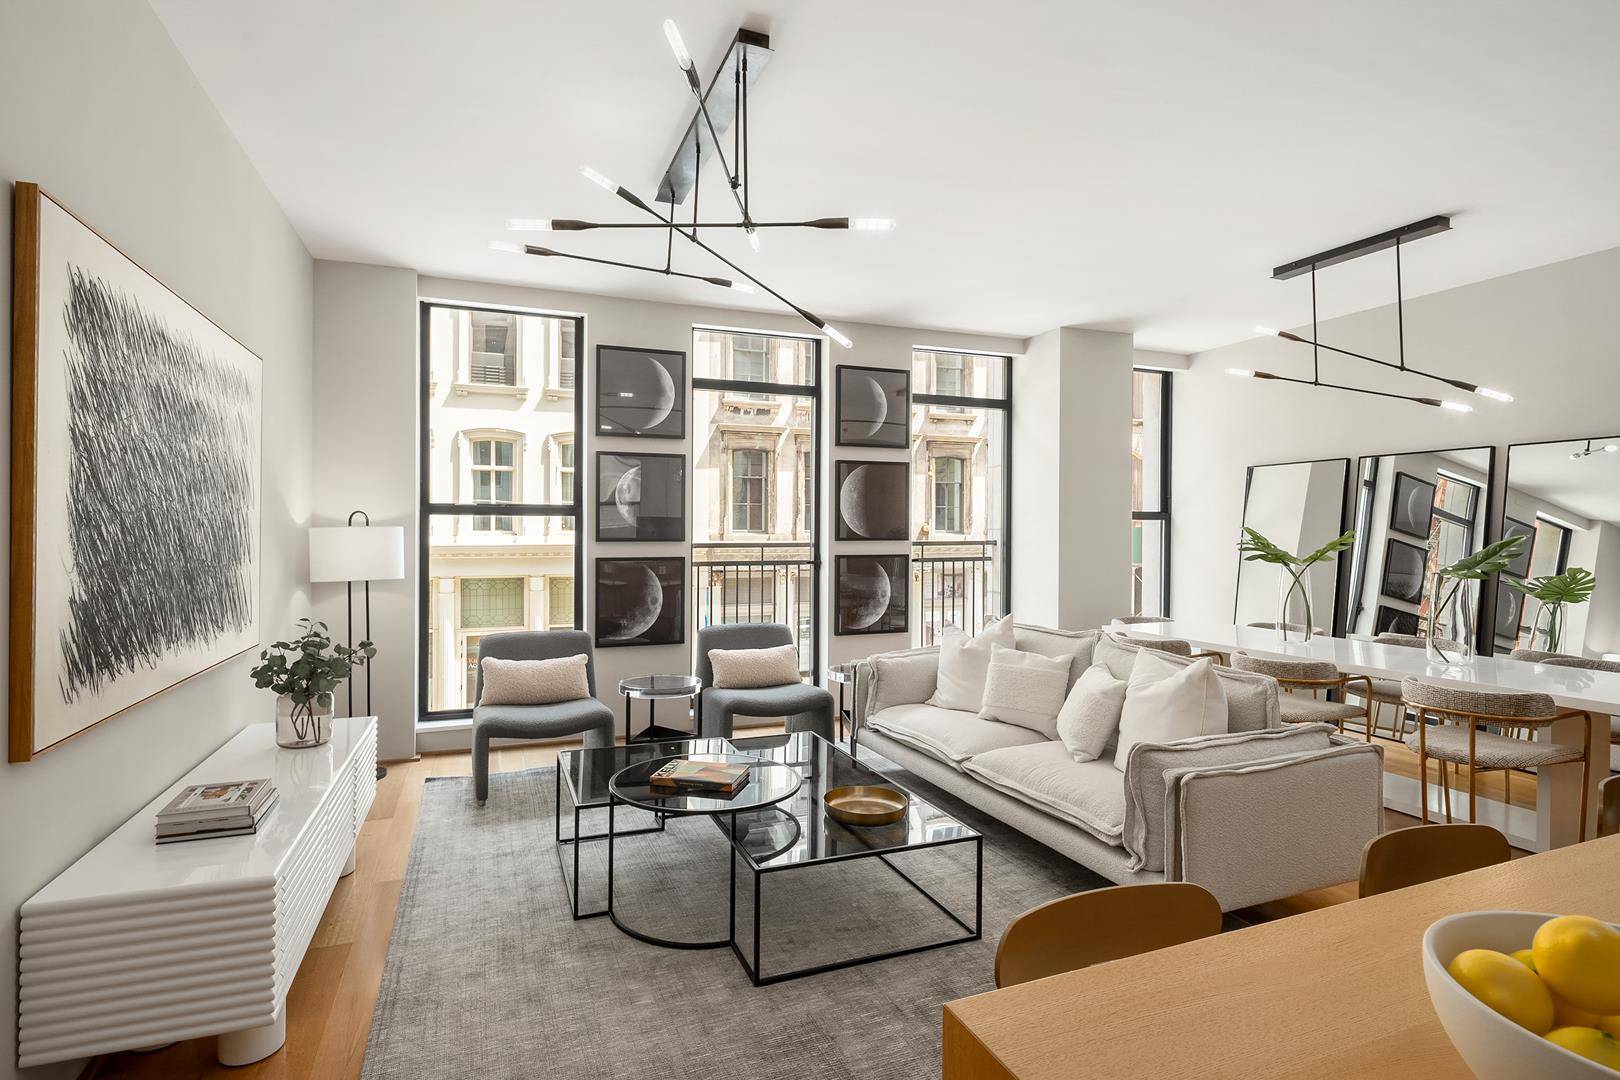 PRIVATE PARKING SPOT amp ; STORAGE UNIT INCLUDEDAVAILABLE FURNISHED FOR 25, 000Welcome to 71 Reade Street which has been crafted by the esteemed Selldorf Architects to bring an elegant condominium ...